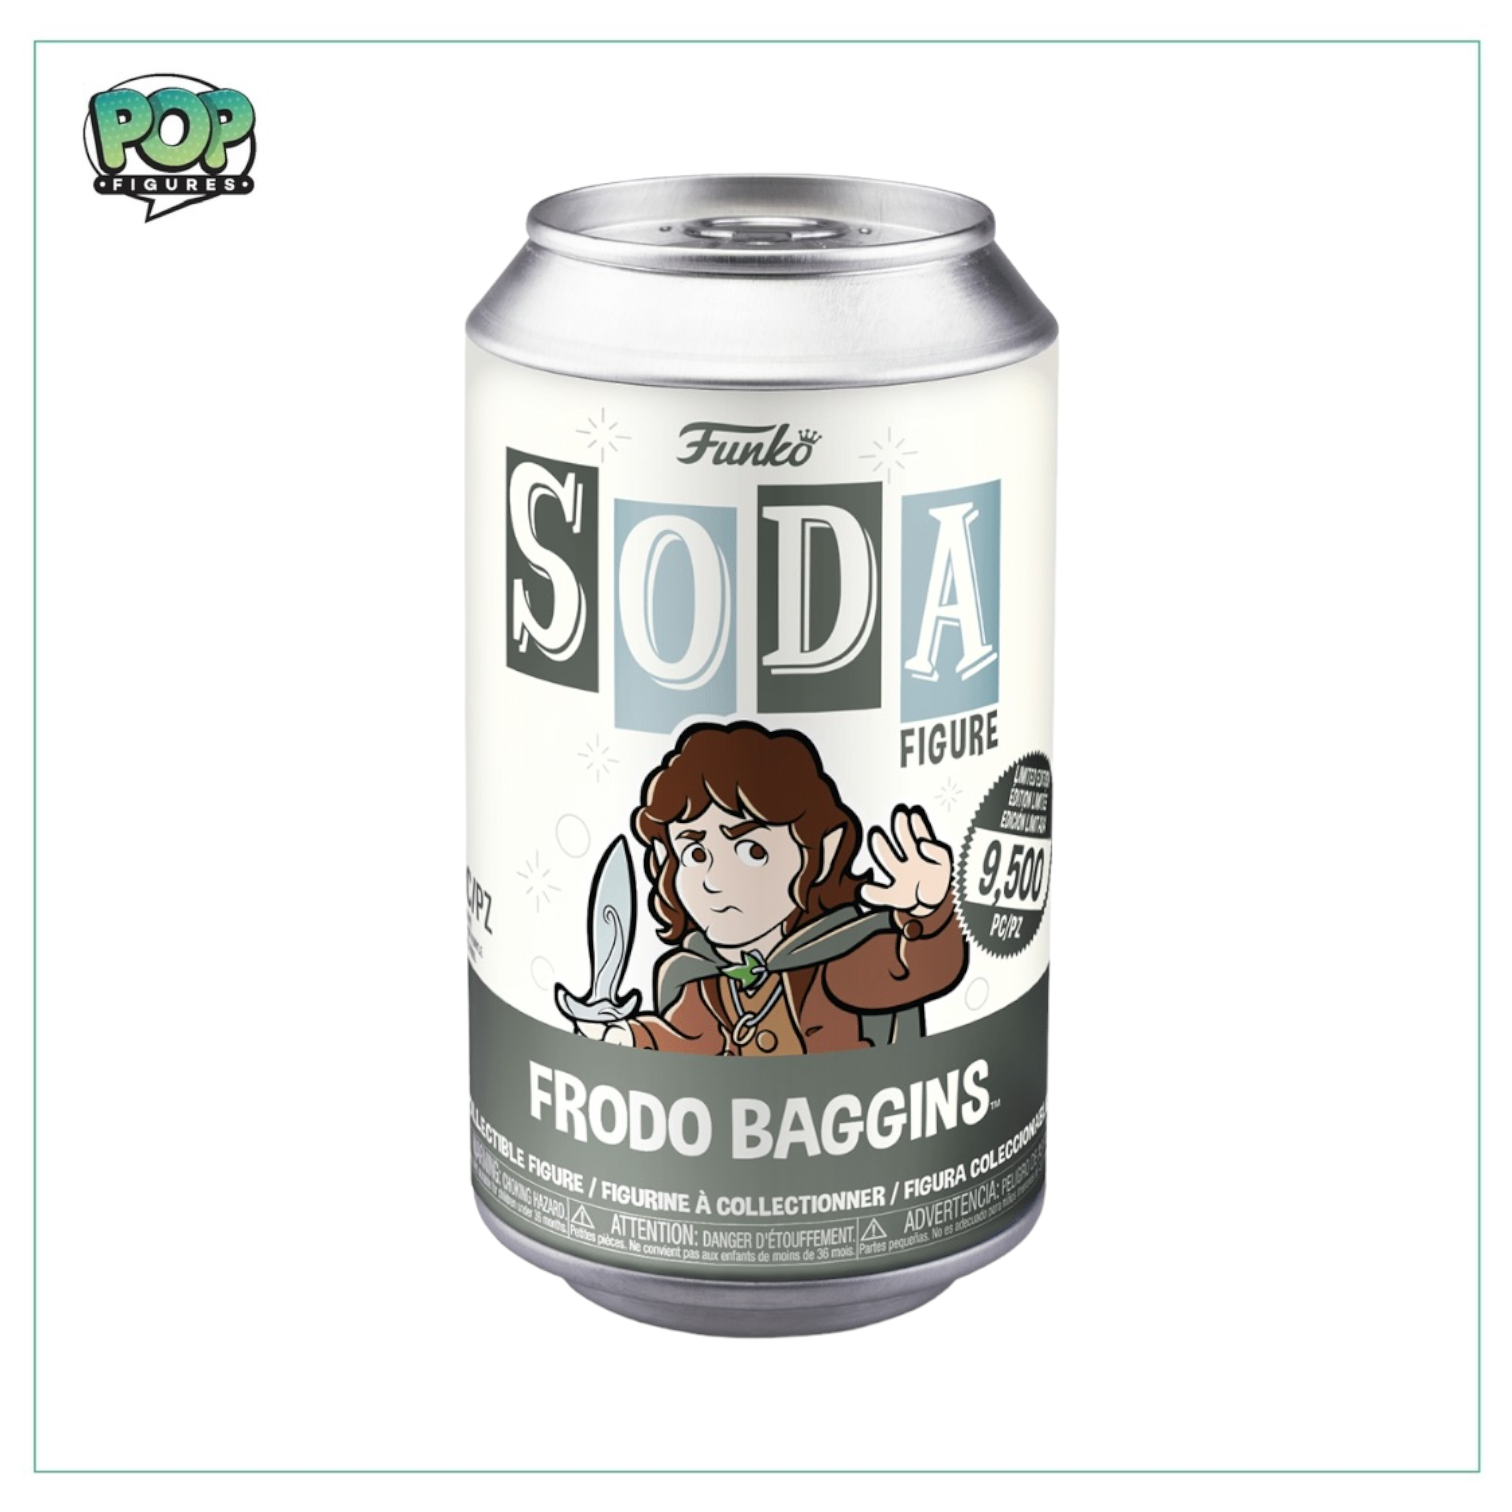 Frodo Baggins Funko Soda Vinyl Figure! - Lord of the Rings -  LE9,500 Pcs - Chance Of Chase